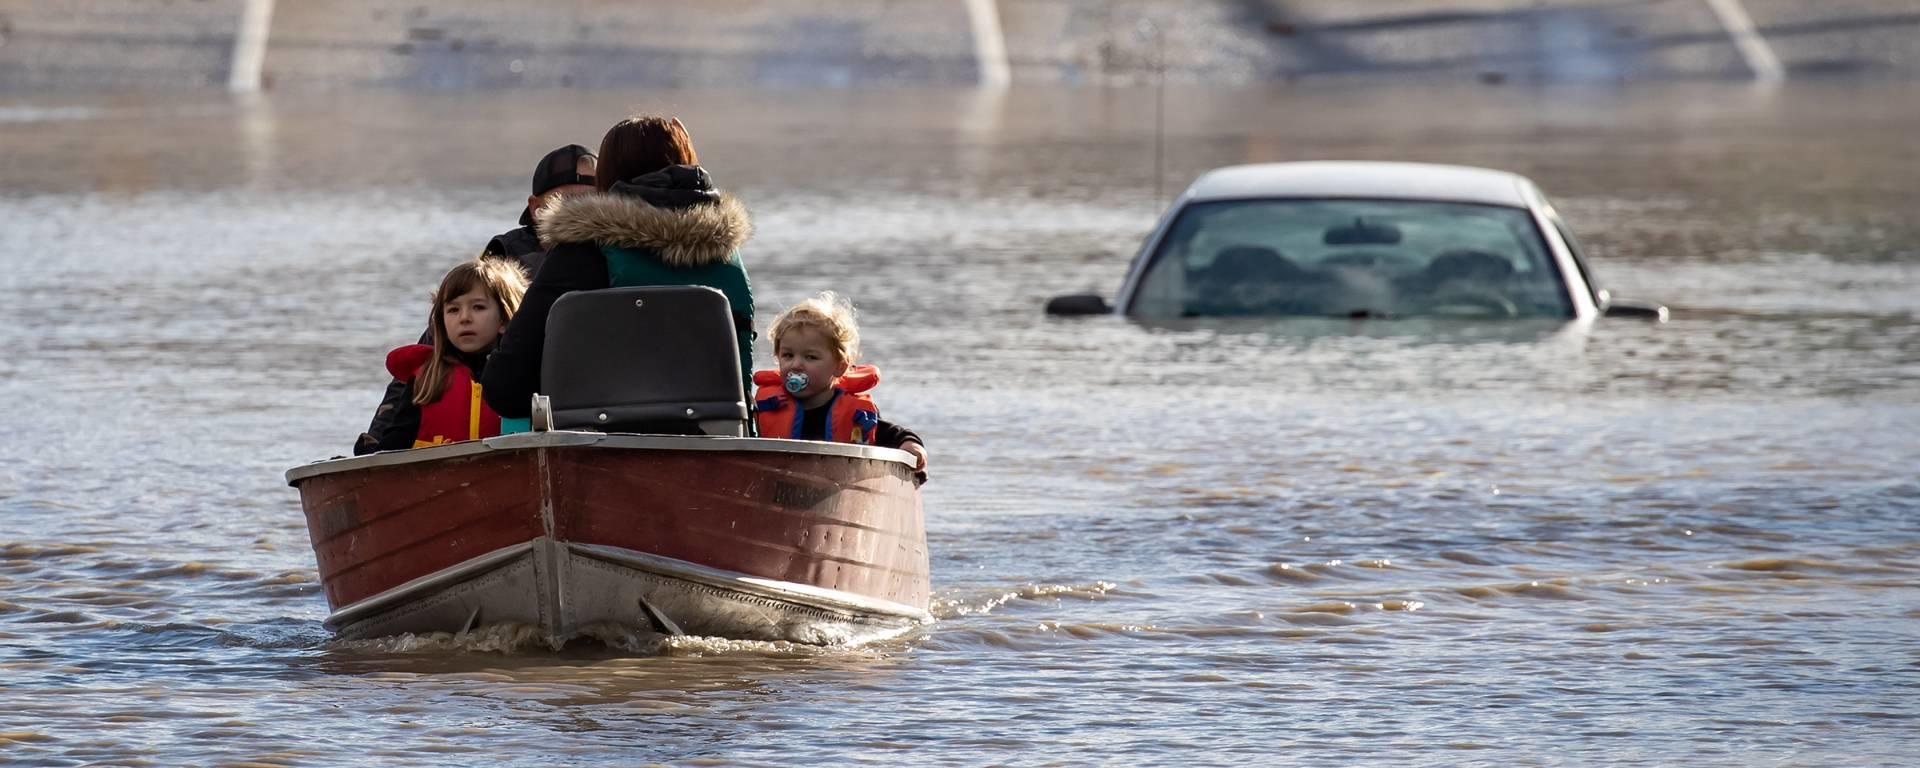 A woman and children who were stranded by high water due to flooding are rescued by a volunteer operating a boat in Abbotsford, B.C., in November 2021.